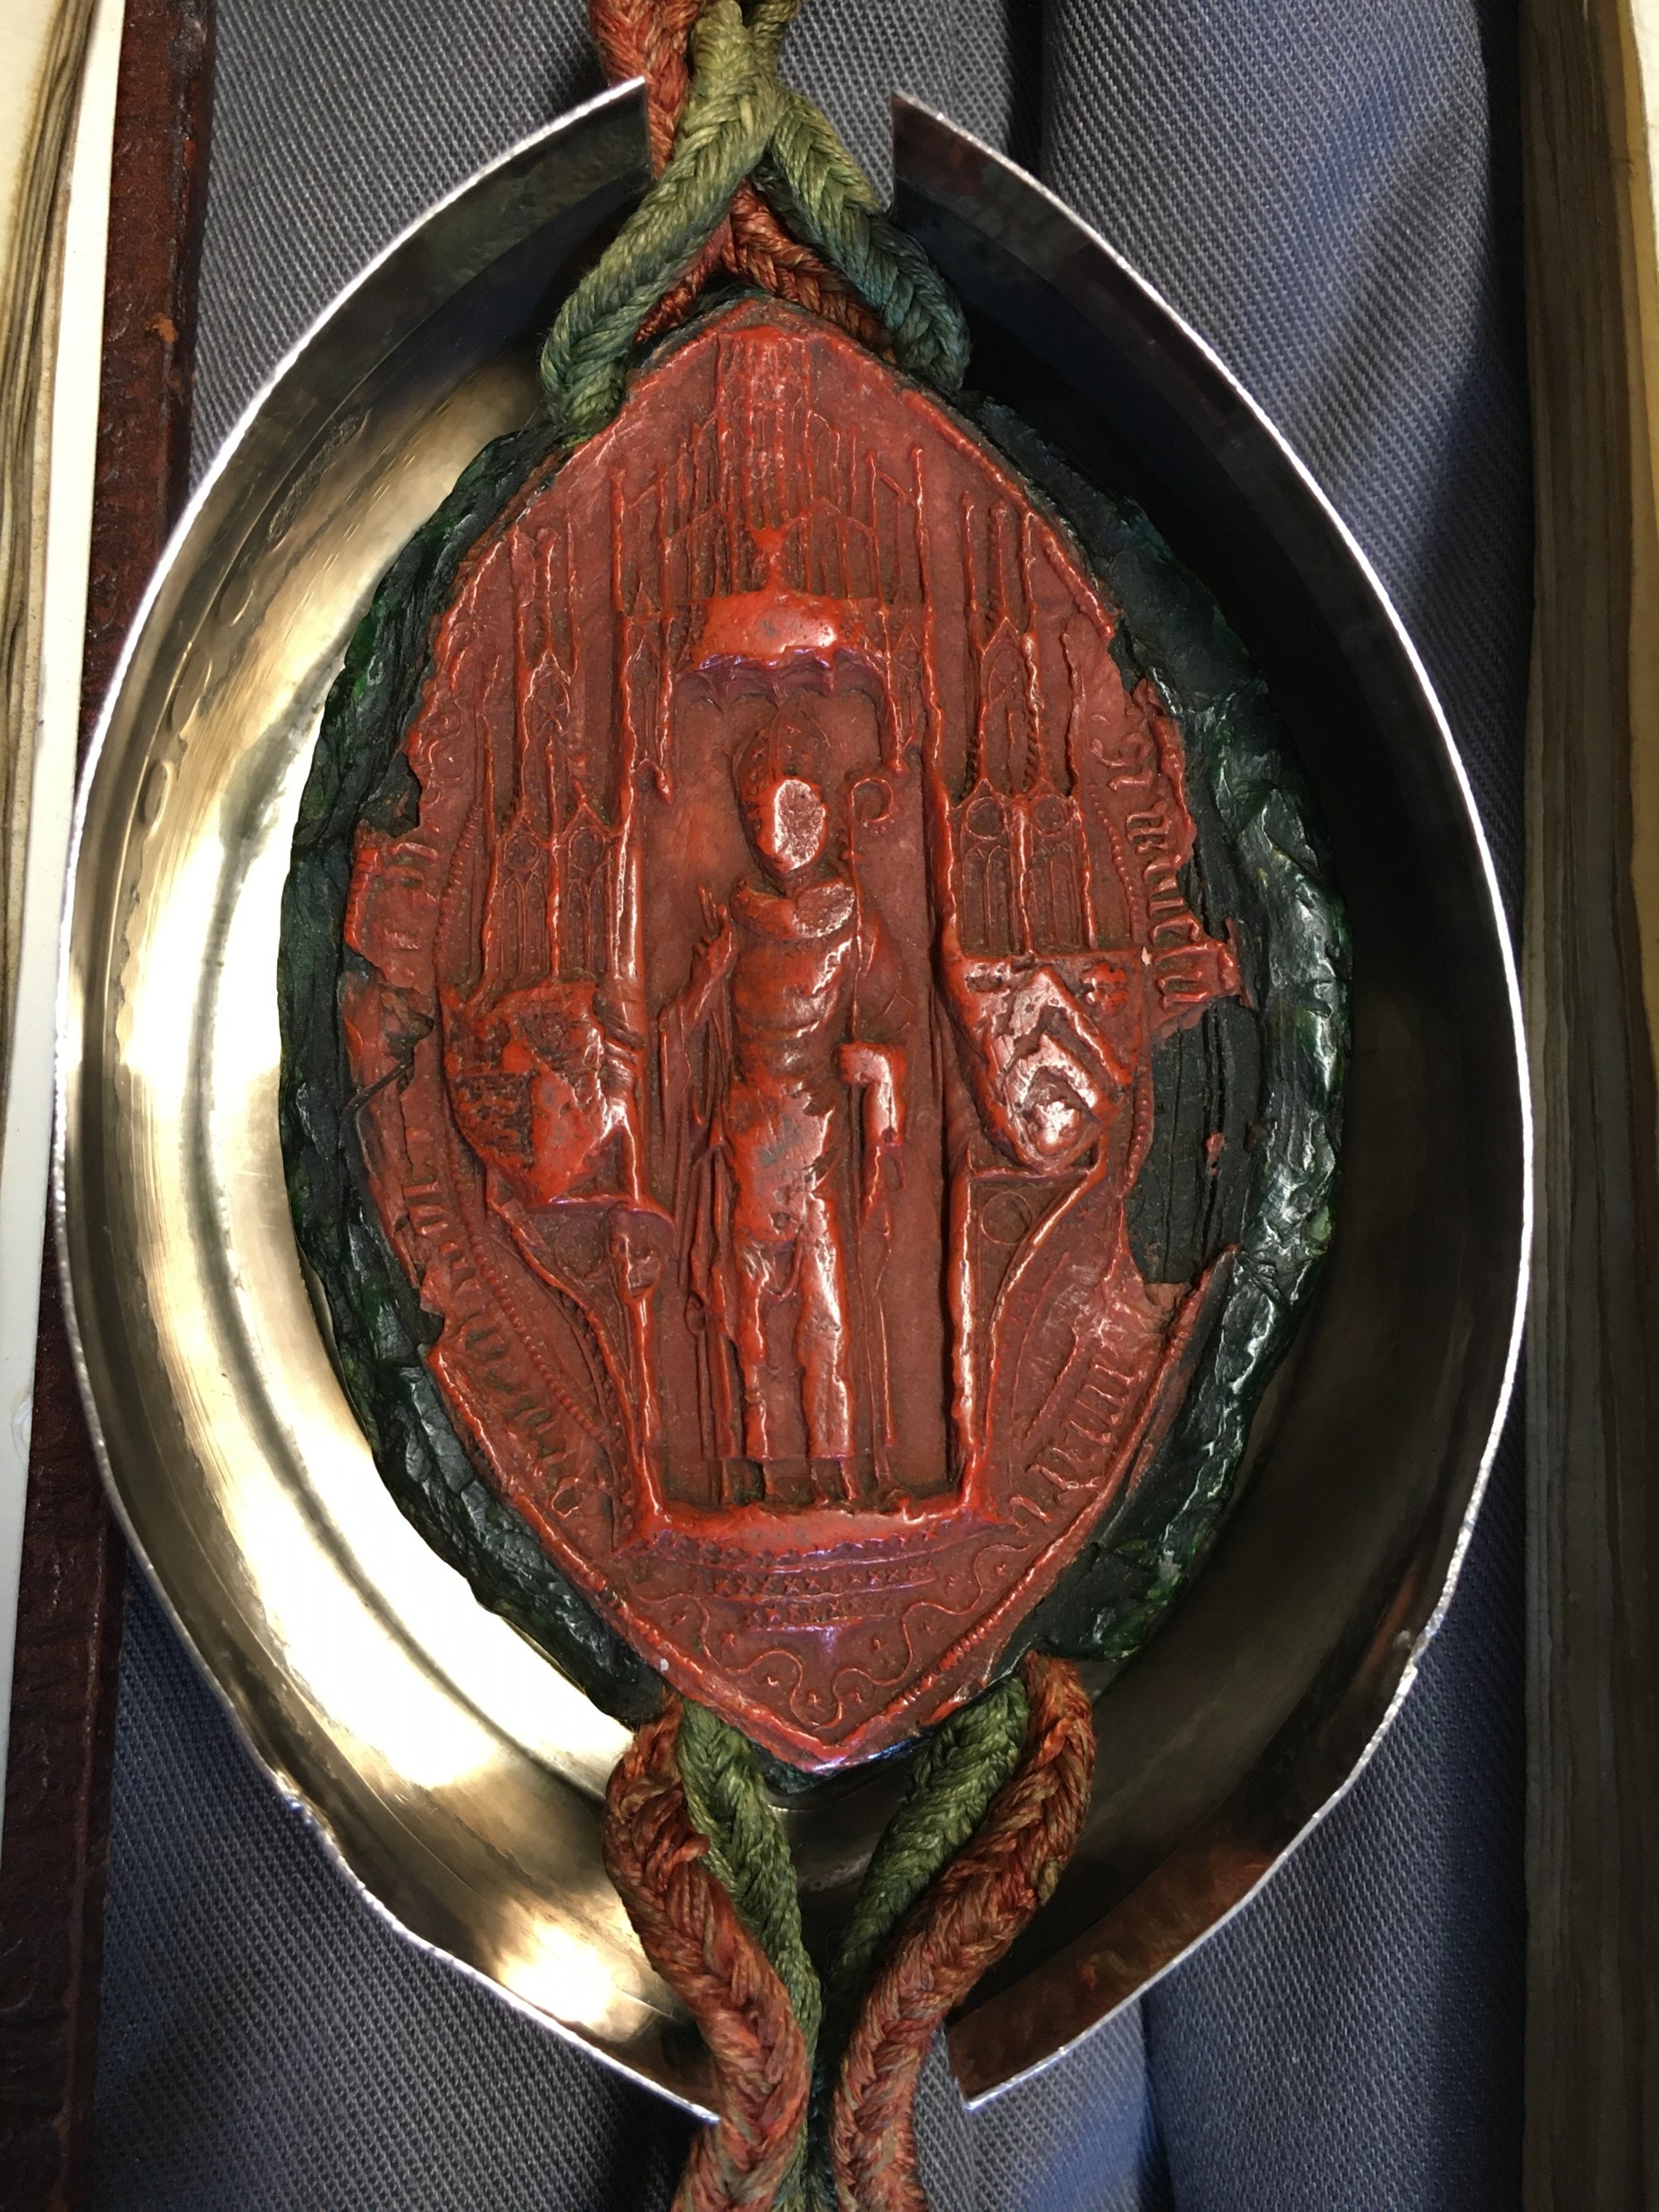 Wax seal featuring a bishop